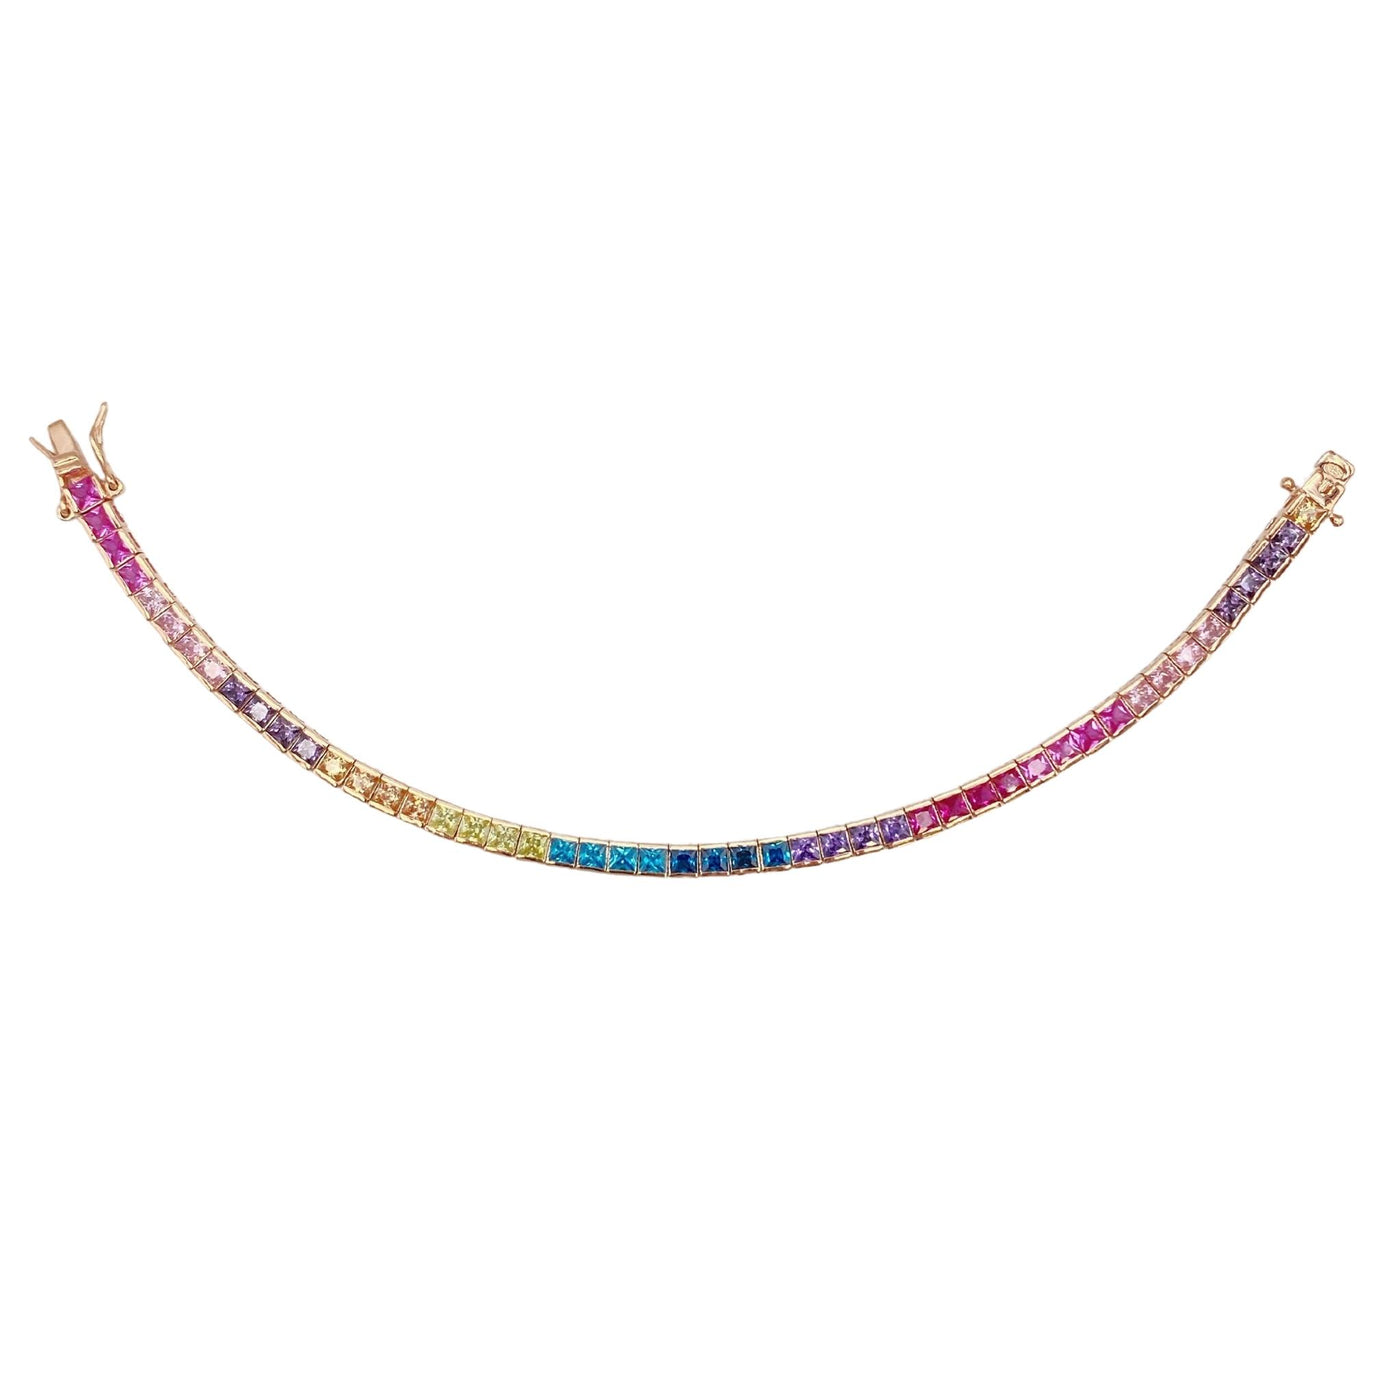 Silver casting tennis bracelet with rainbow square stones - rose